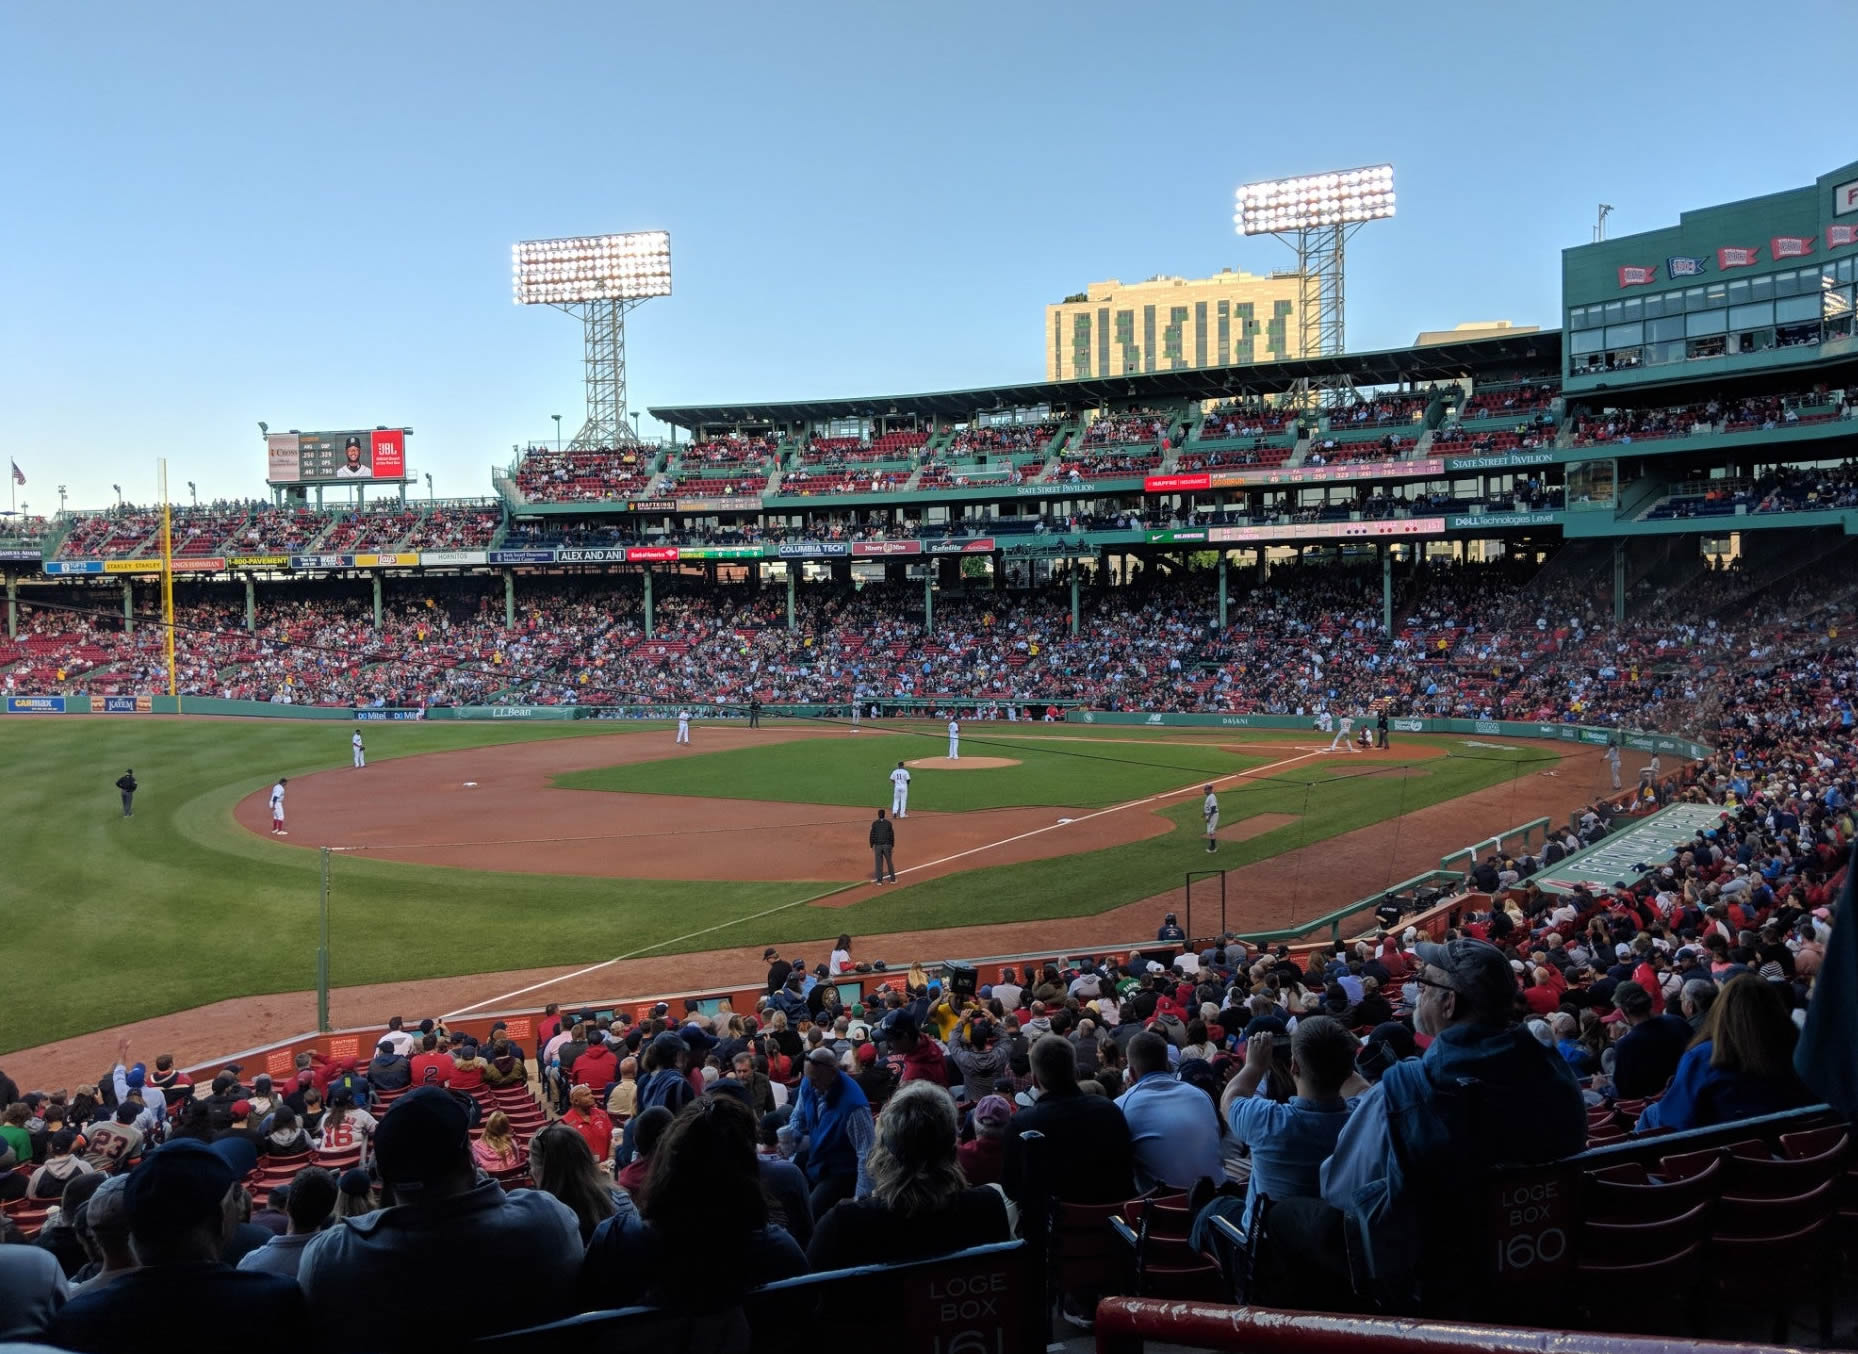 grandstand 31, row 1 seat view  for baseball - fenway park